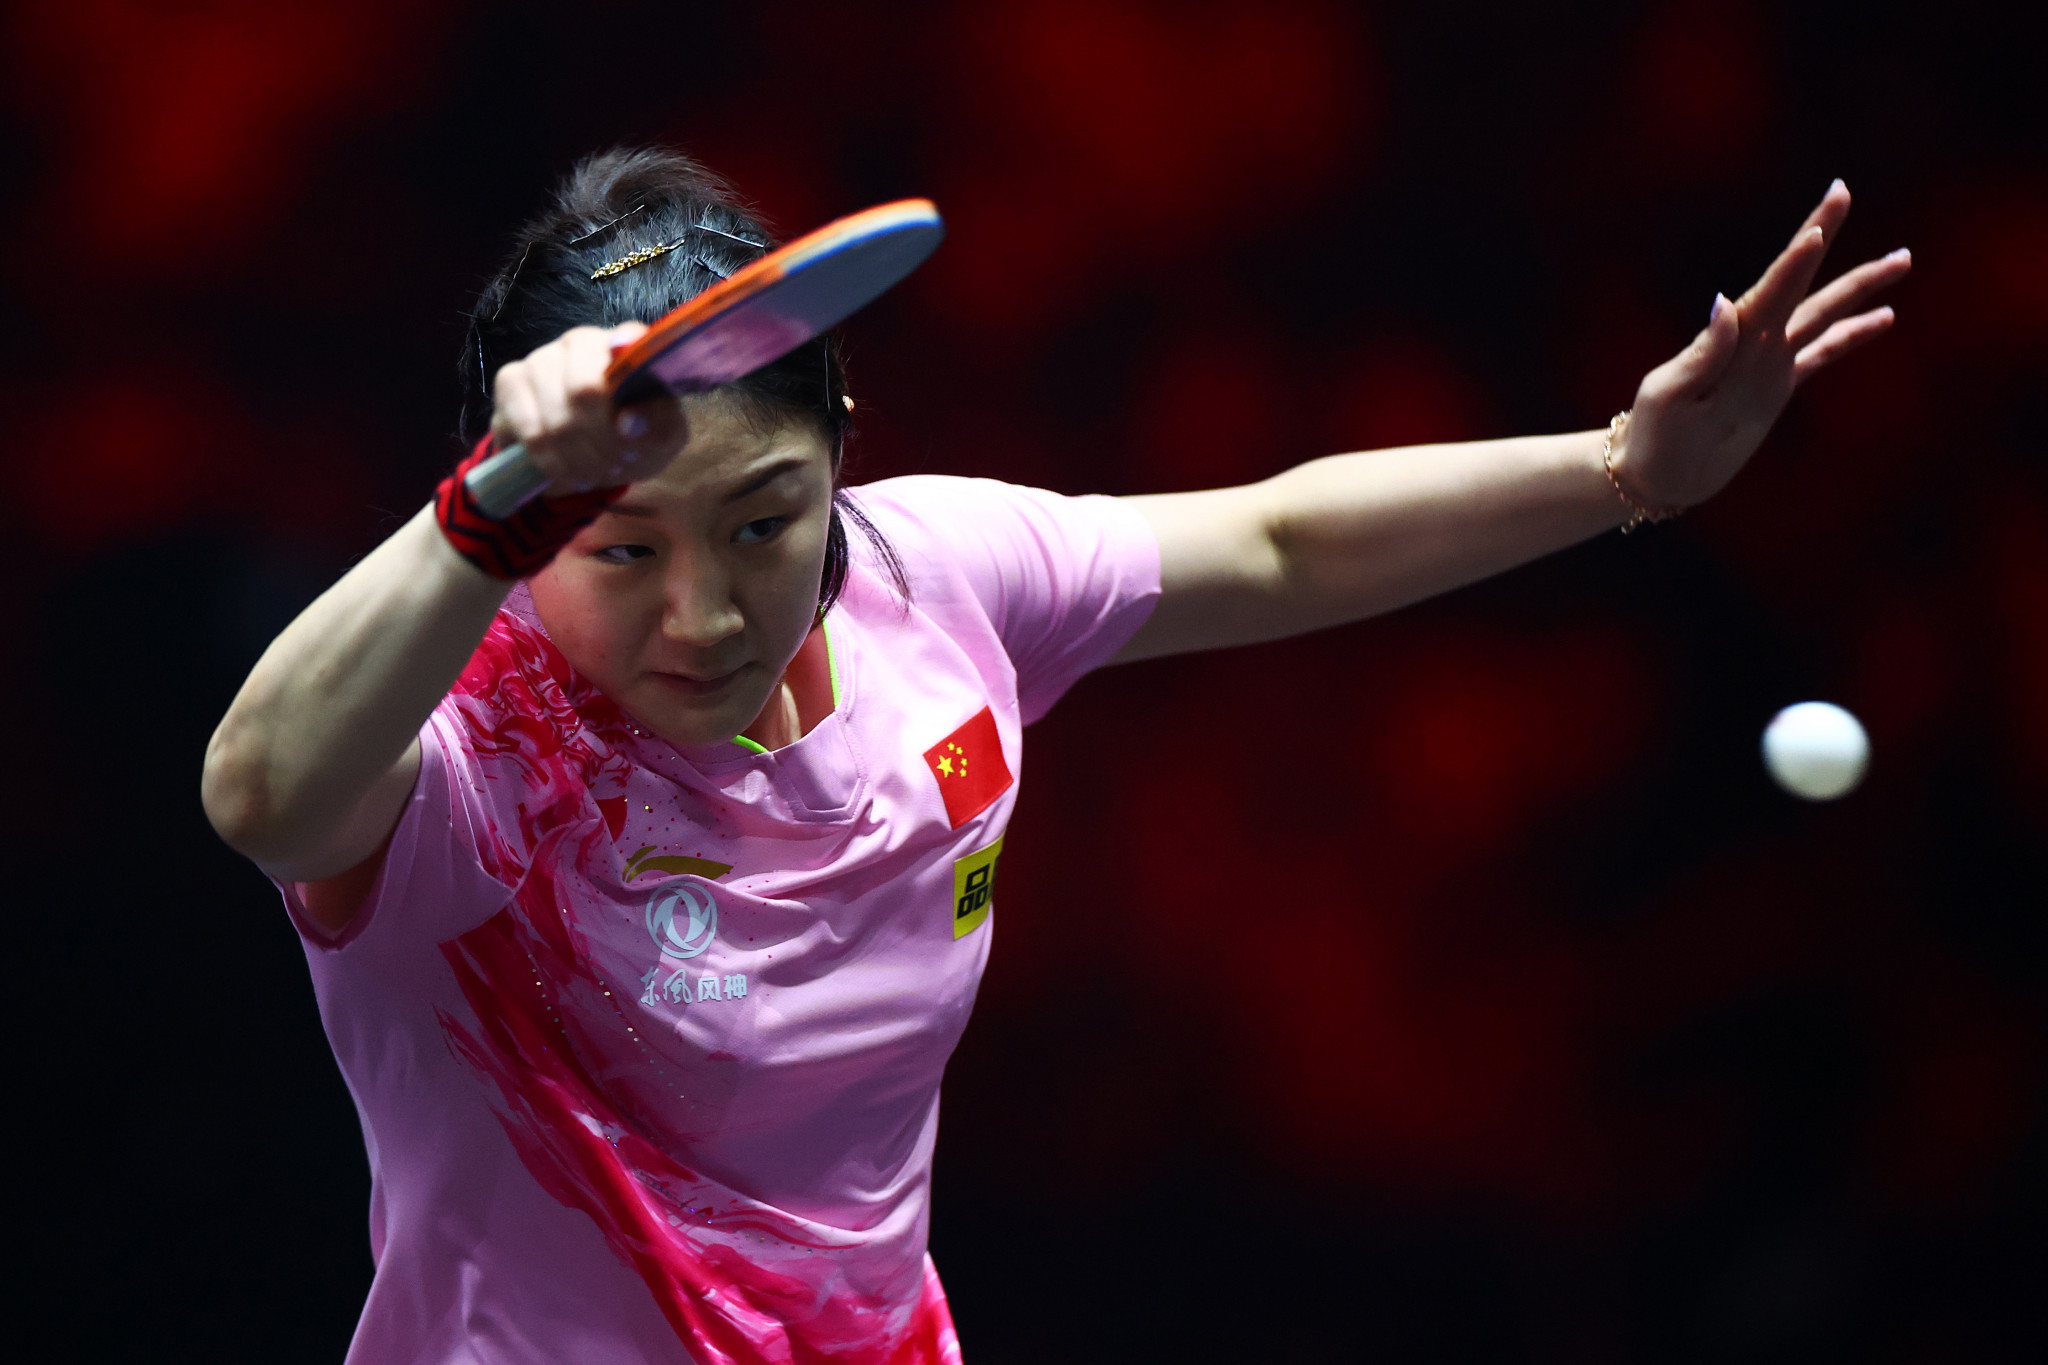 Chen Meng is one of the athletes looking to claim the first WTT Champions title in Budapest ©Getty Images